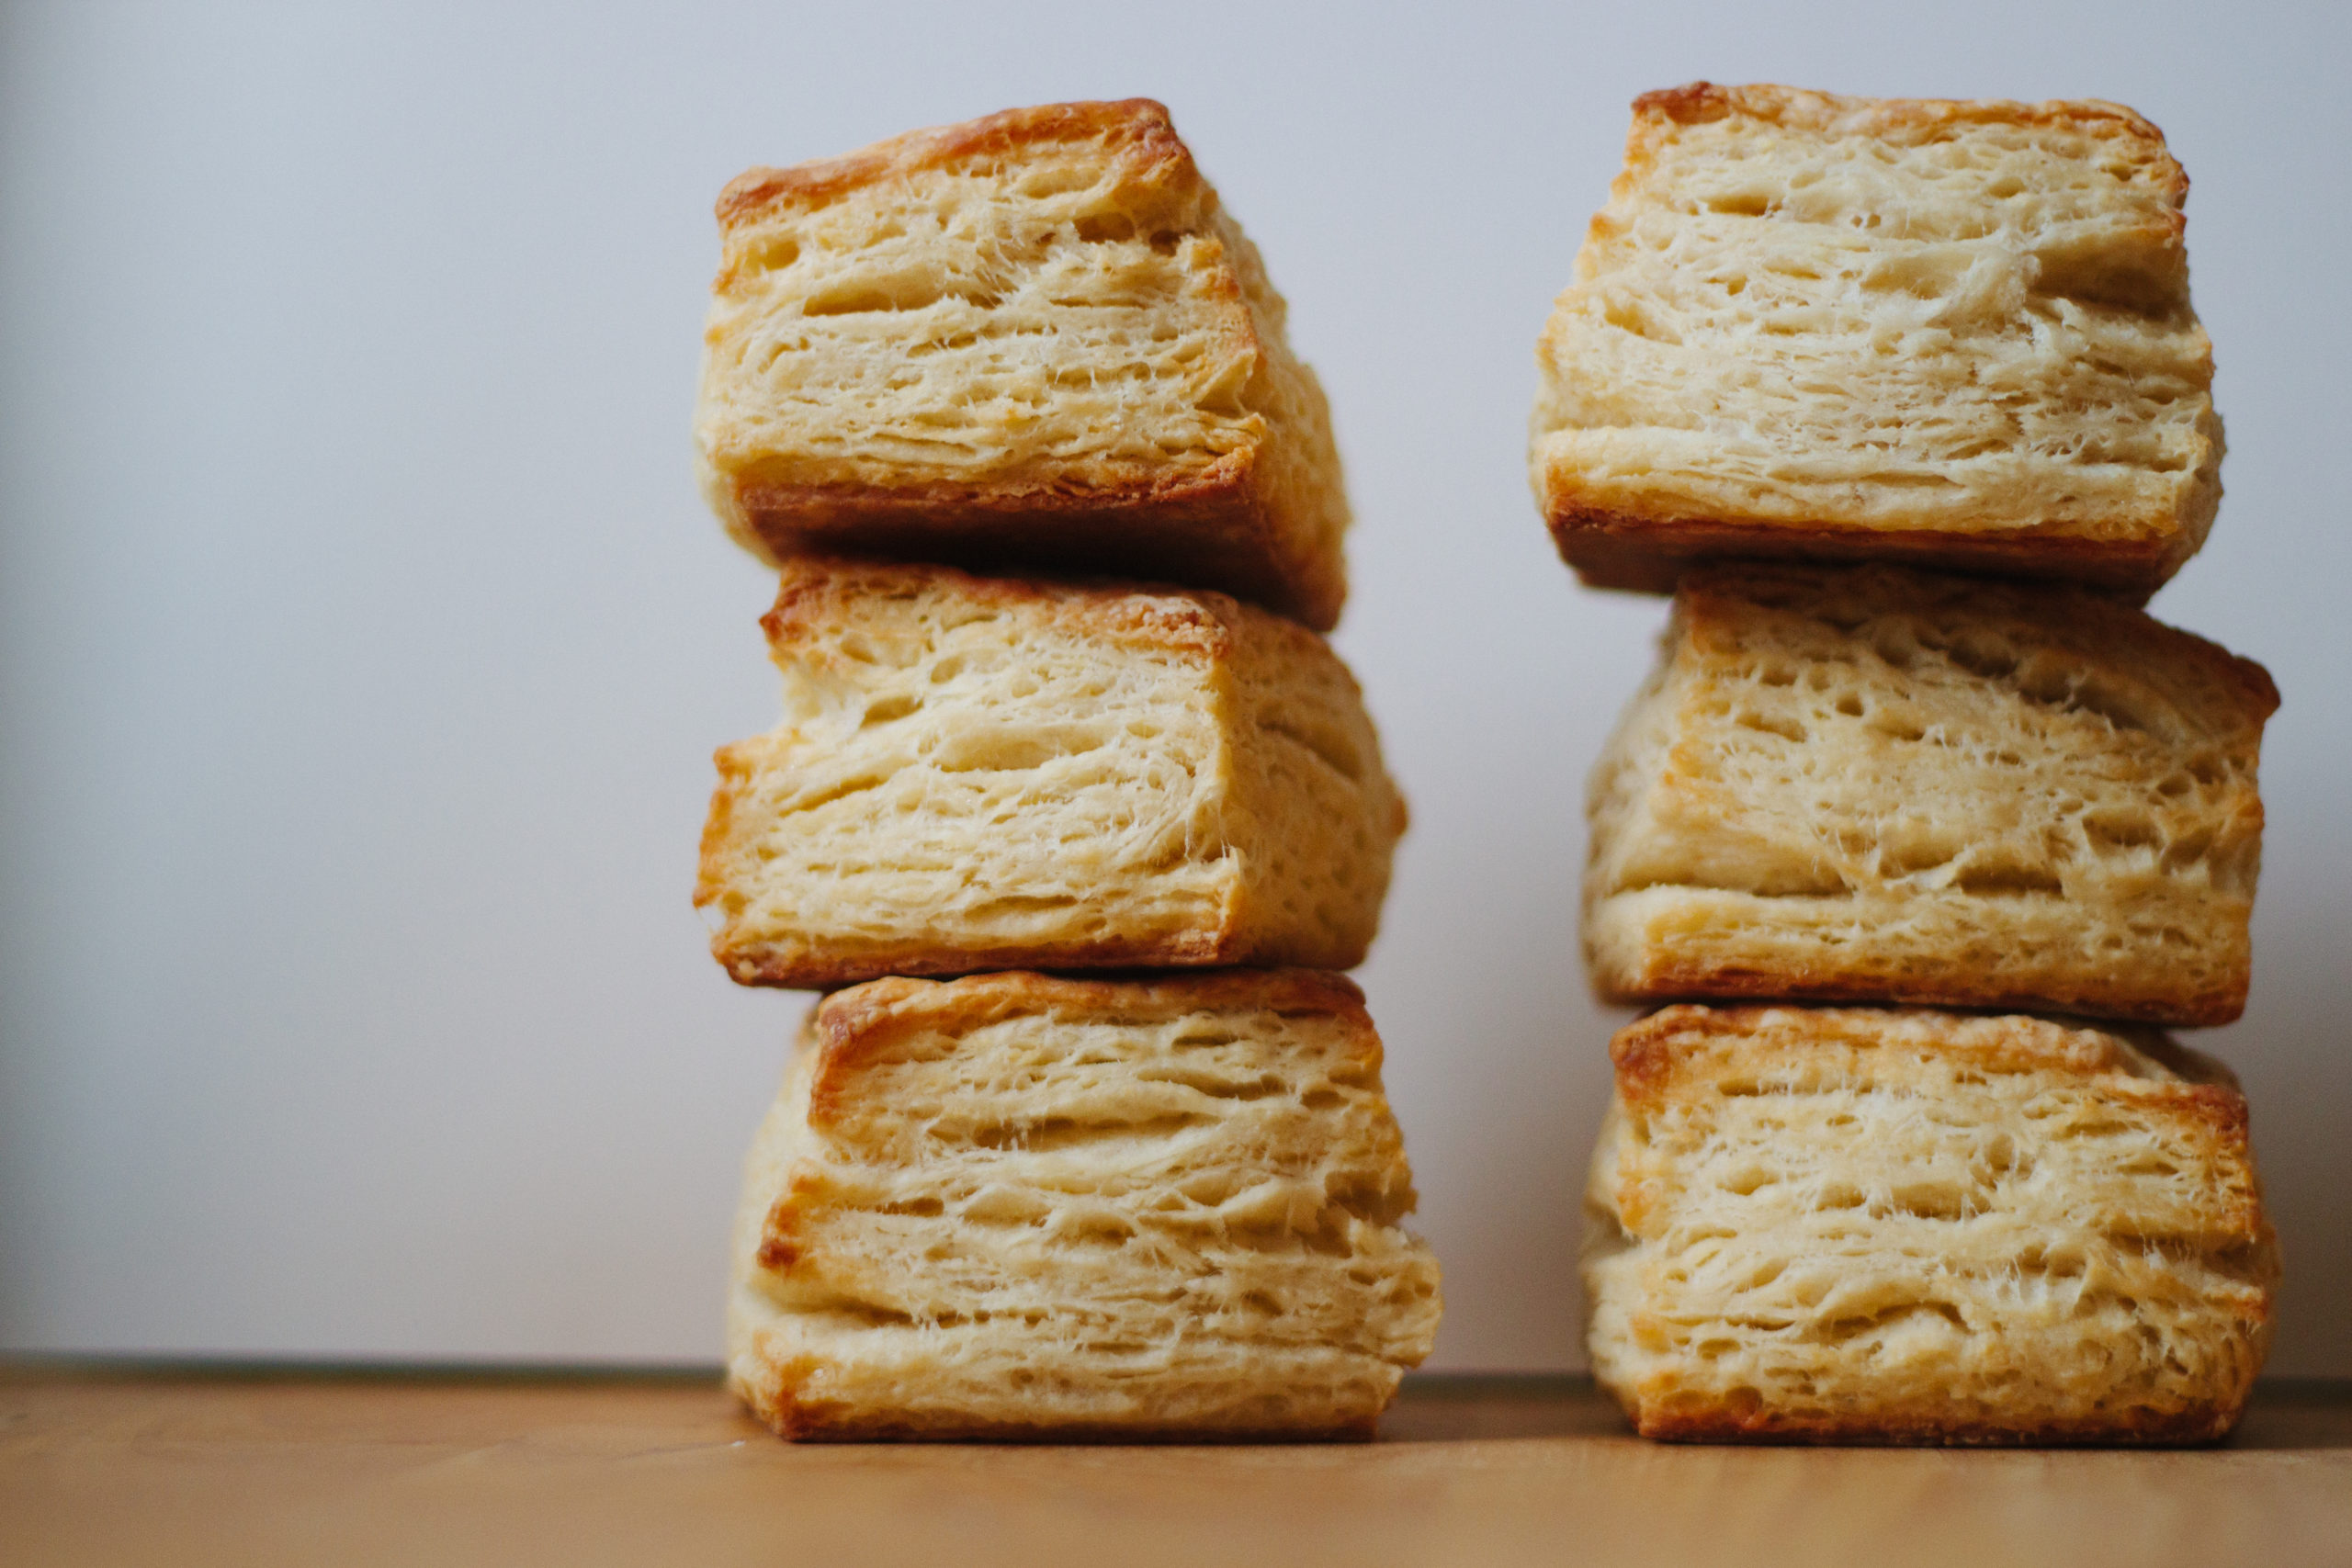 https://michellearbus.com/wp-content/uploads/2021/03/buttermilk-biscuits-3-of-19-scaled.jpg